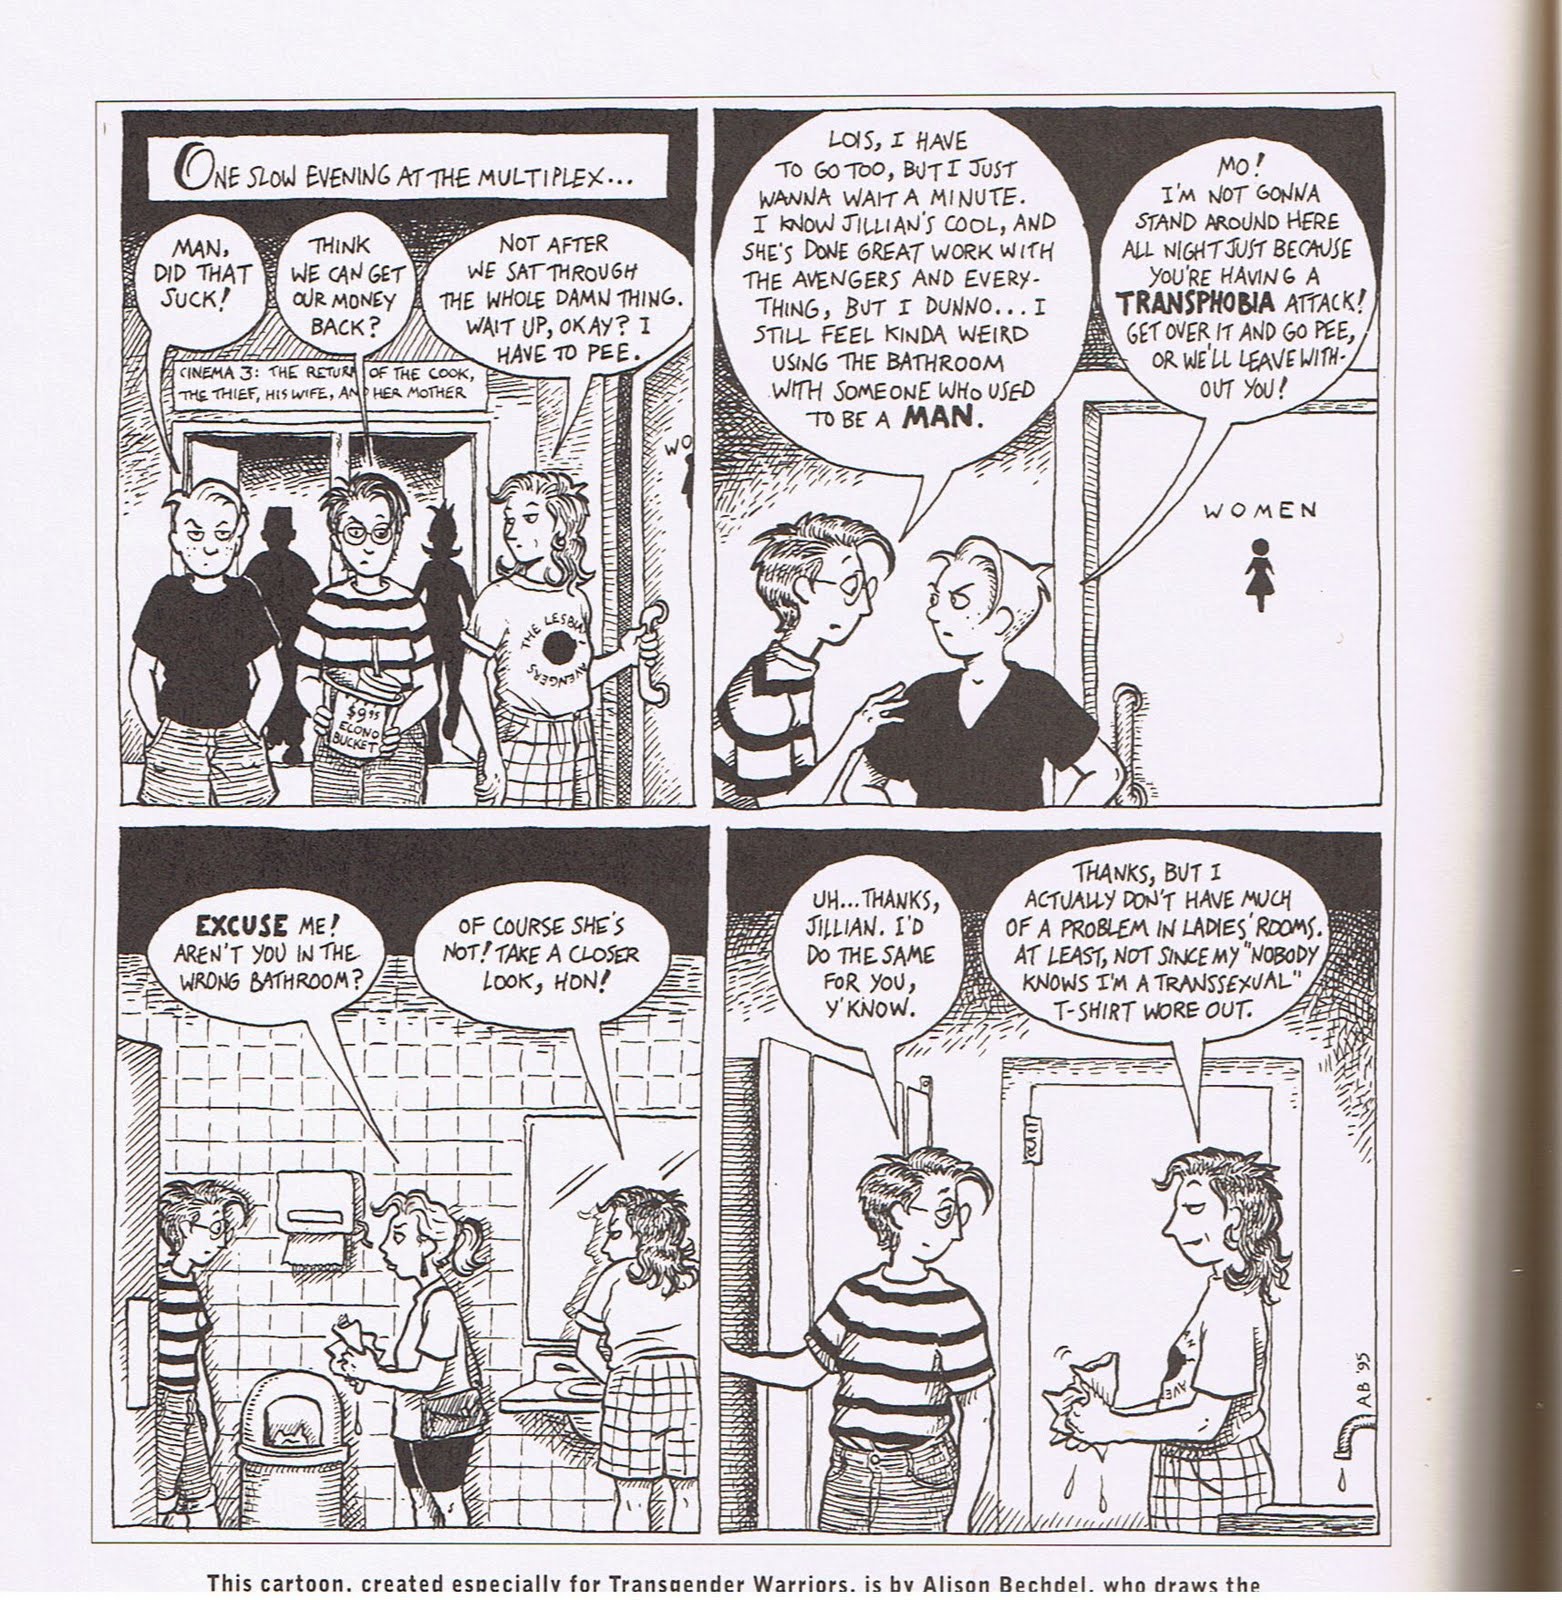 Gender Variance in the Arts: An Alison Bechdel cartoon